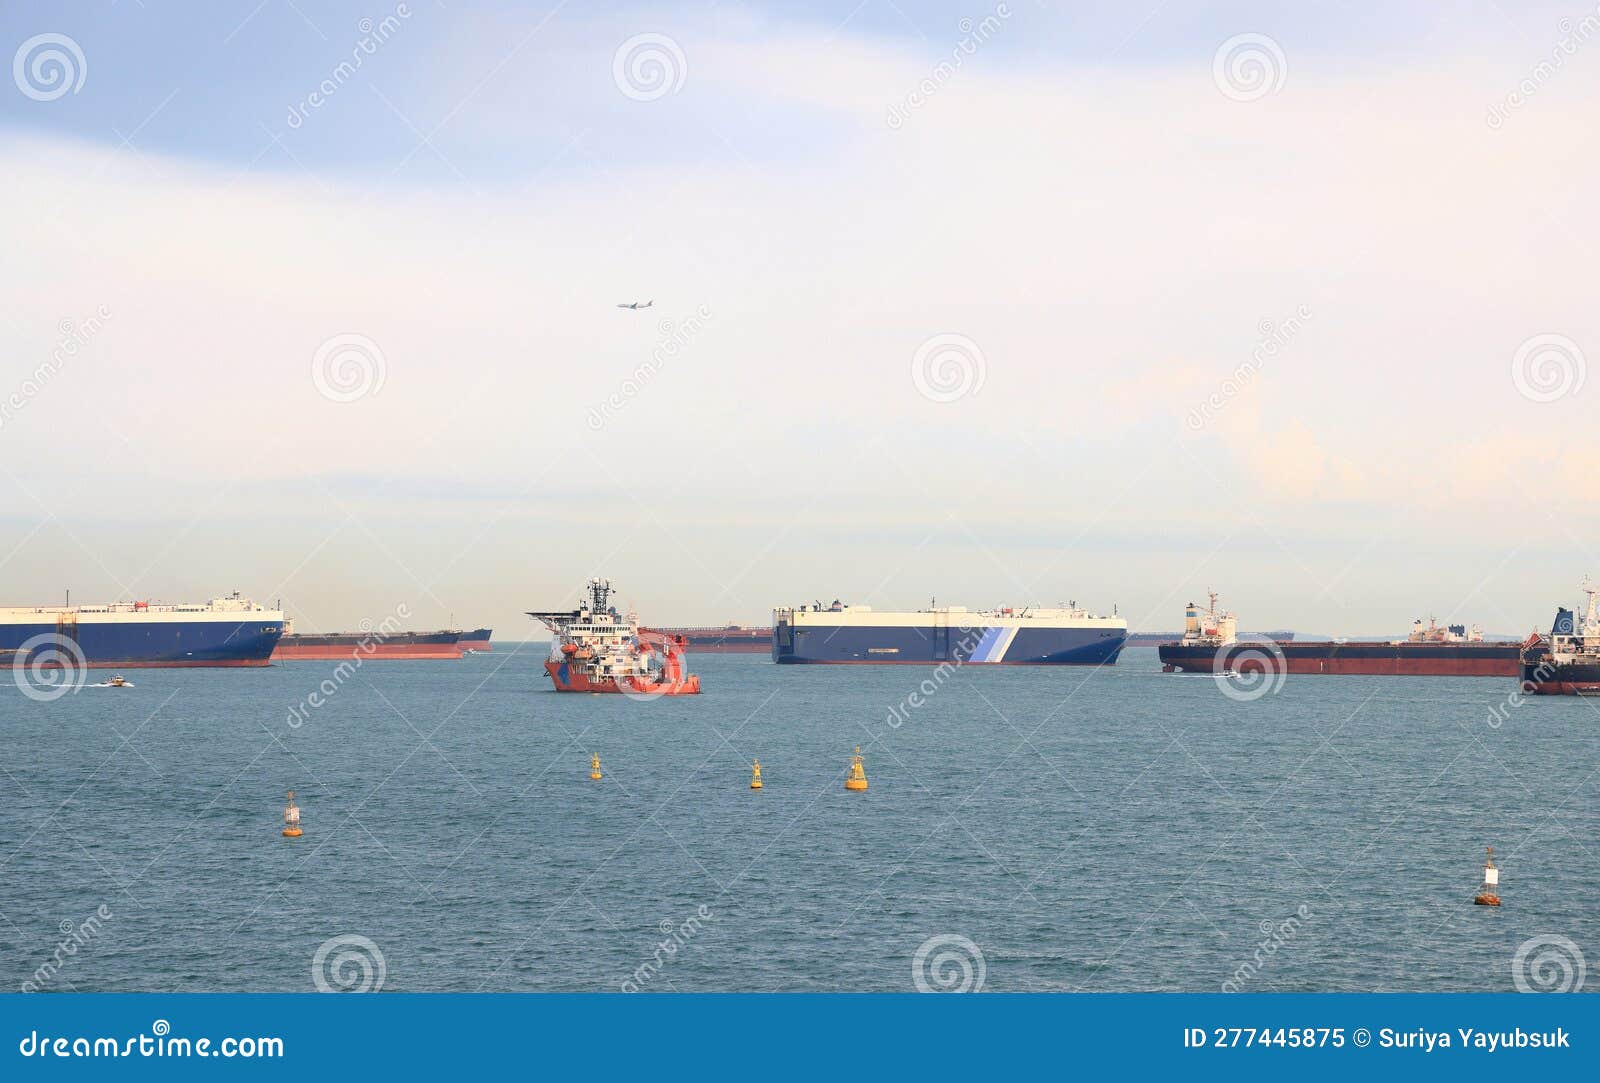 ocean liner, tanker and cargo ship in singapore strait